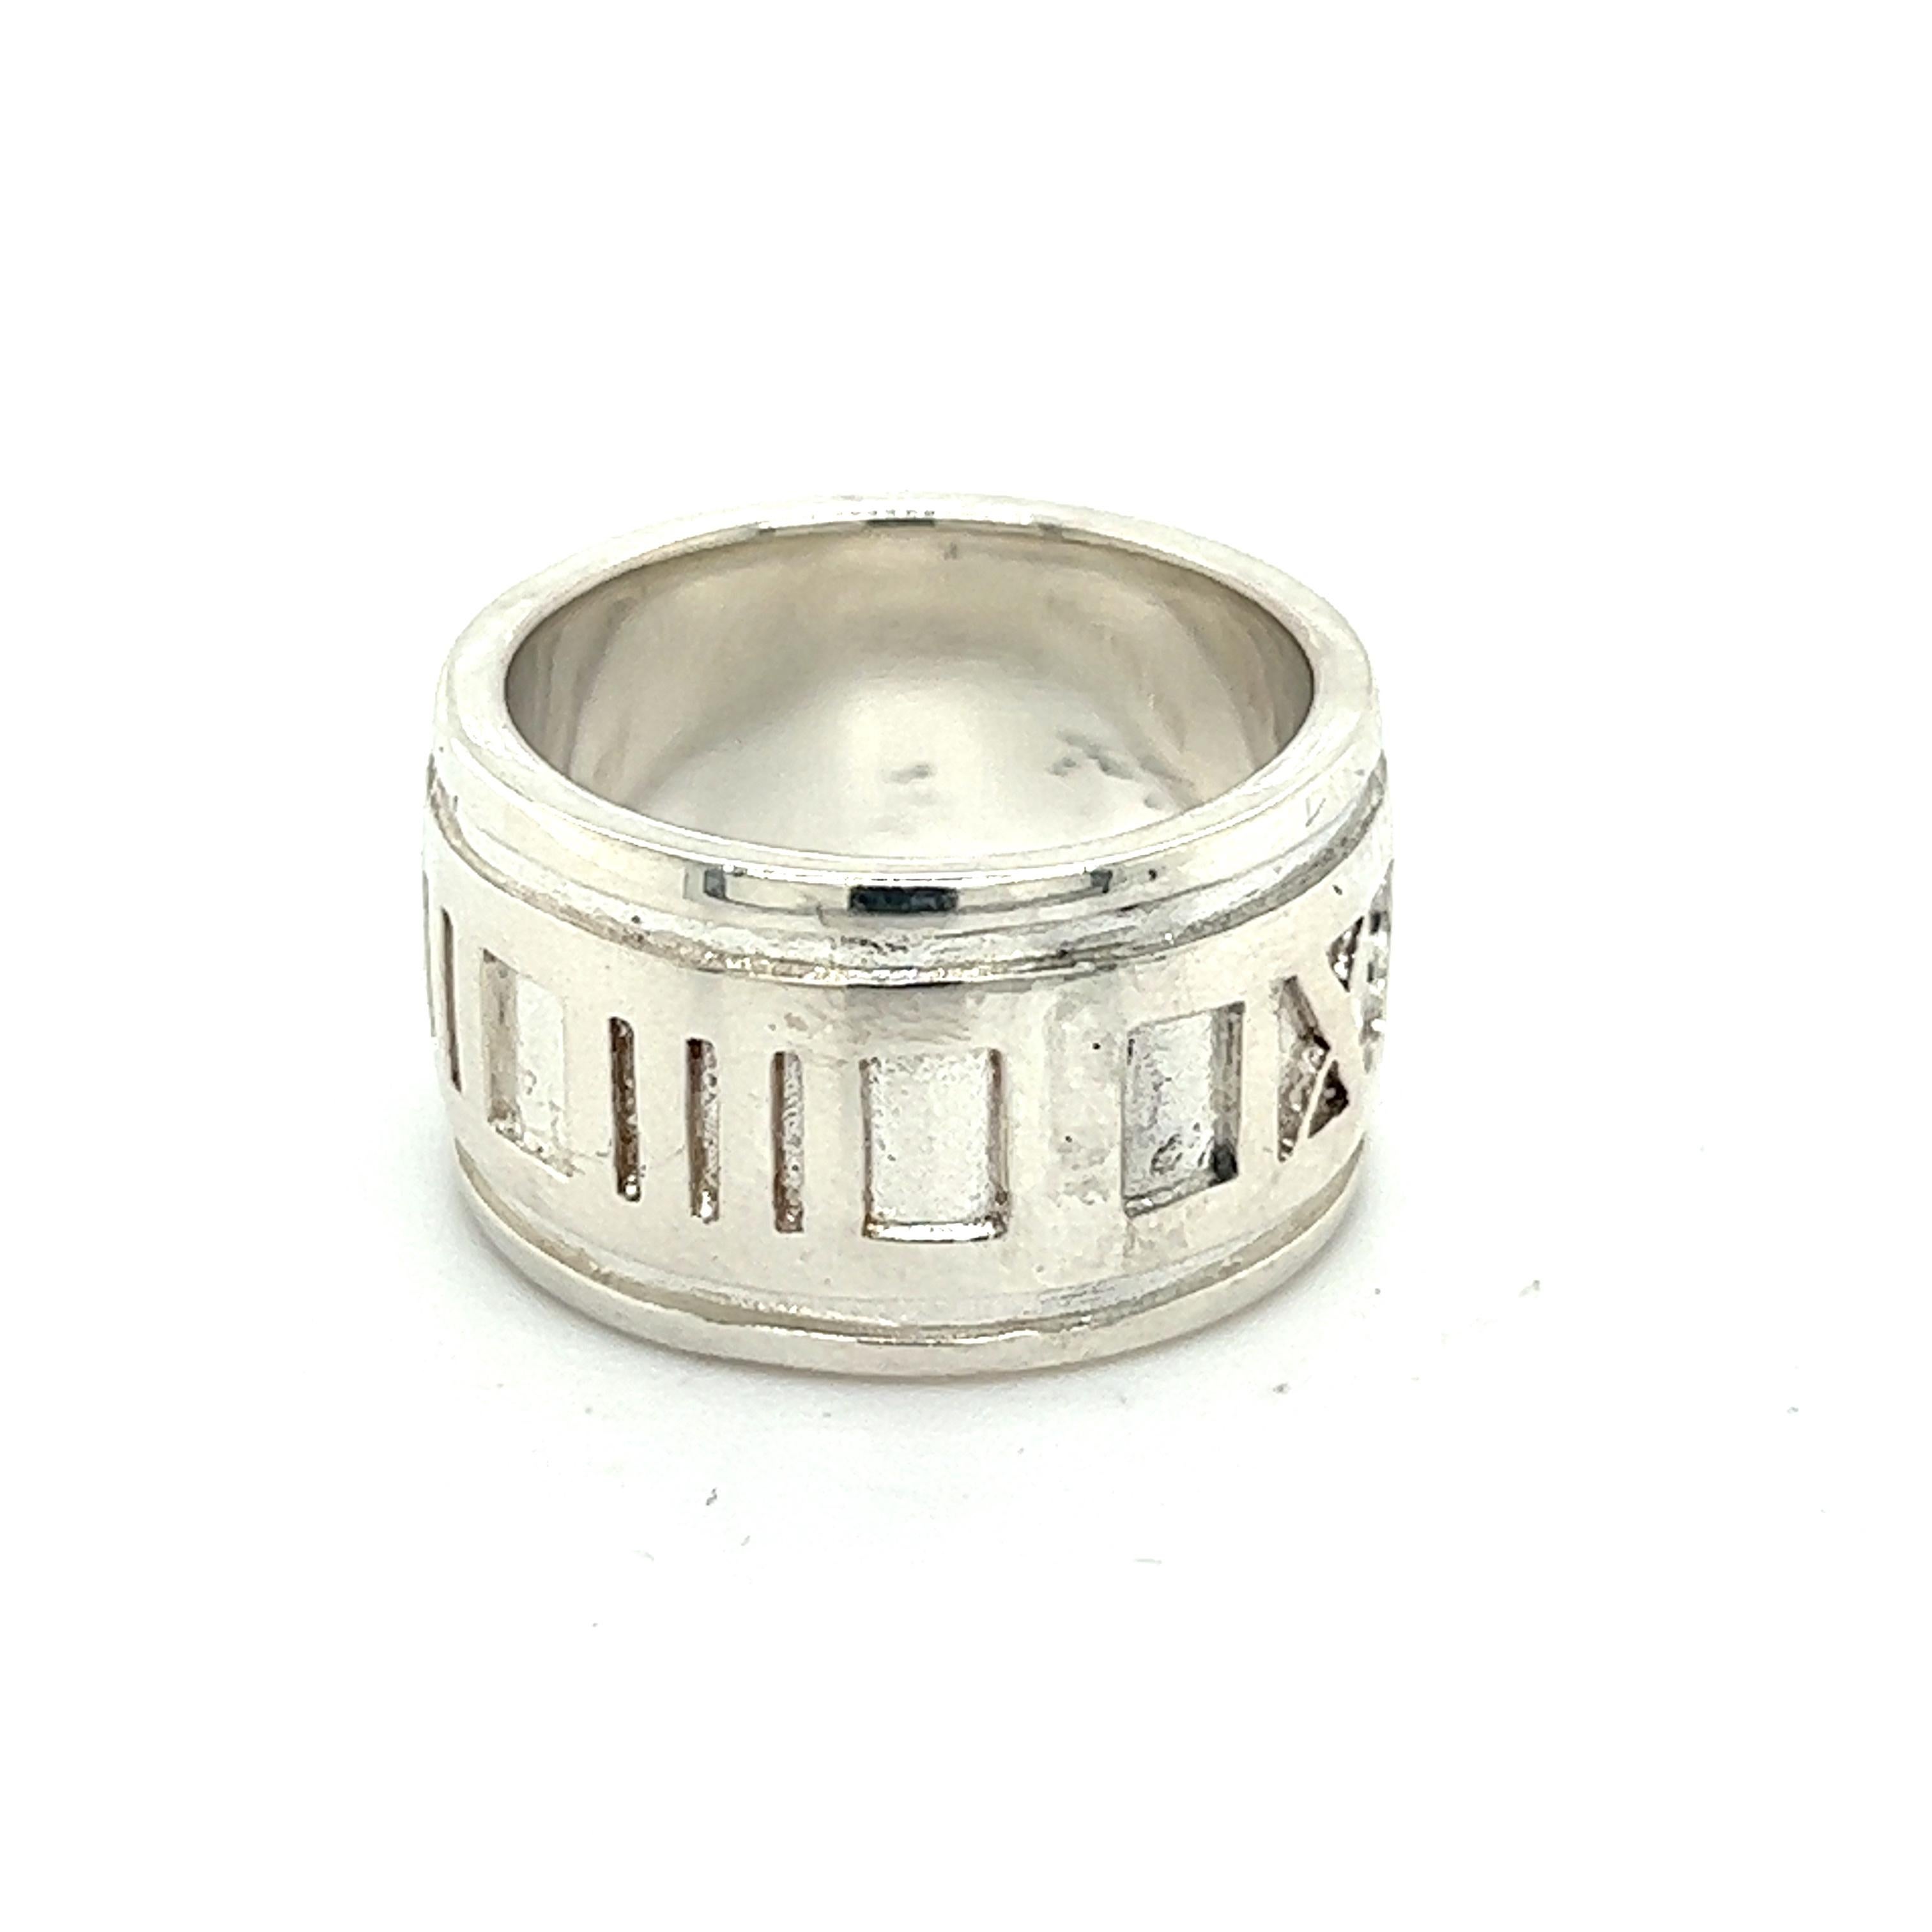 Authentic Tiffany & Co Estate Atlas Ring Size 4 Silver 11 mm TIF499

TRUSTED SELLER SINCE 2002

DETAILS
Ring Size: 4
Height: 11 mm
Weight: 5.2 Grams
Metal: Sterling Silver

We try to present our estate items as best as possible and most have been